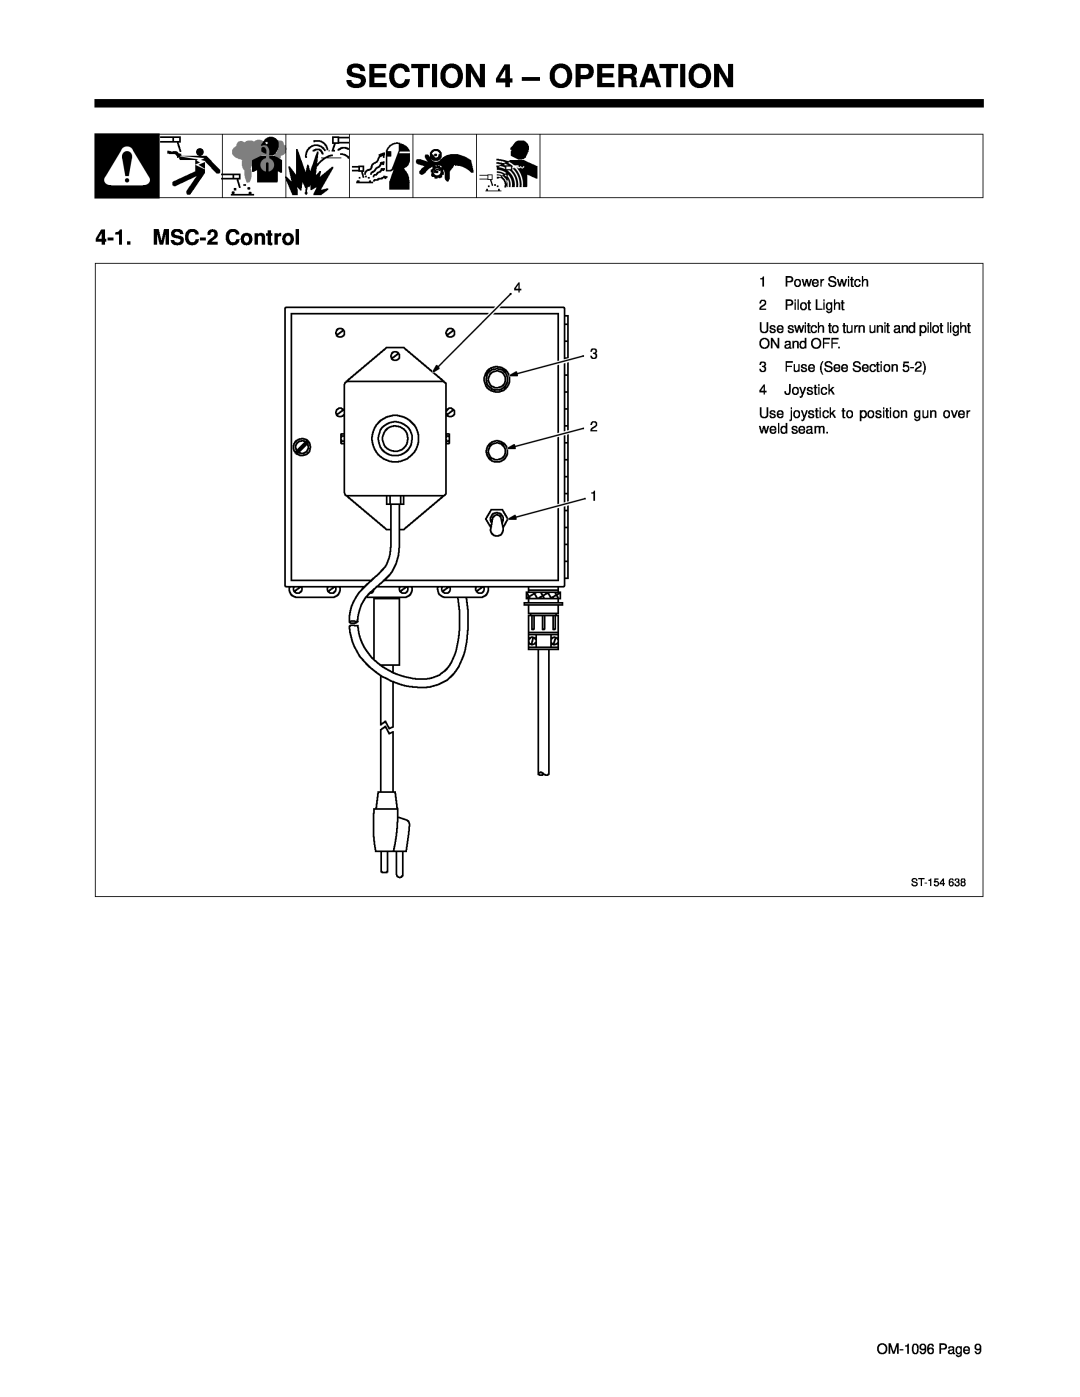 Miller Electric manual Operation, MSC-2 Control 